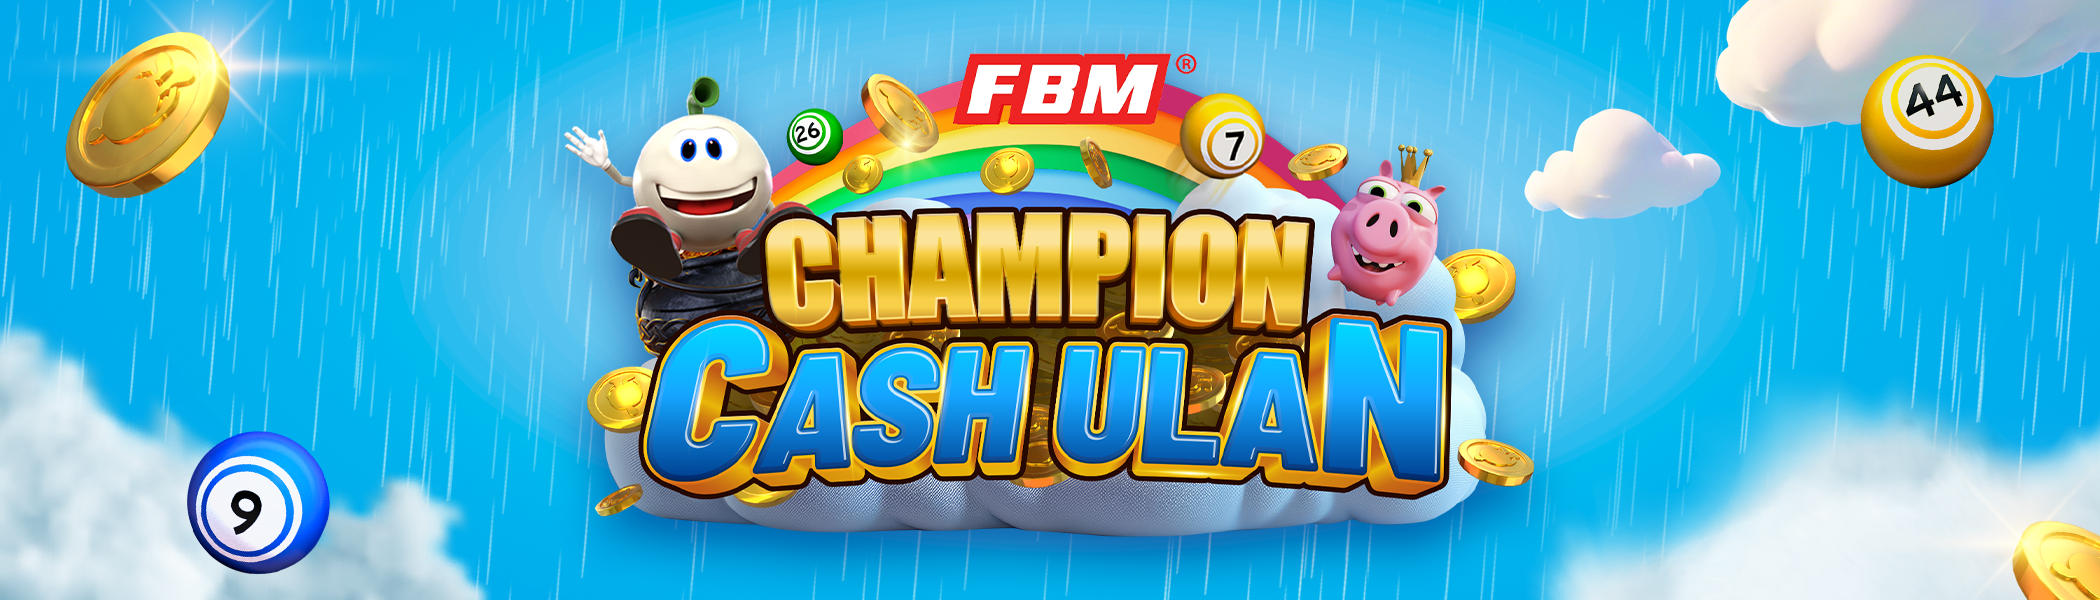 Lucky rain is coming with FBM’s Champion Cash Ulan bingo hall promo in the Philippines!